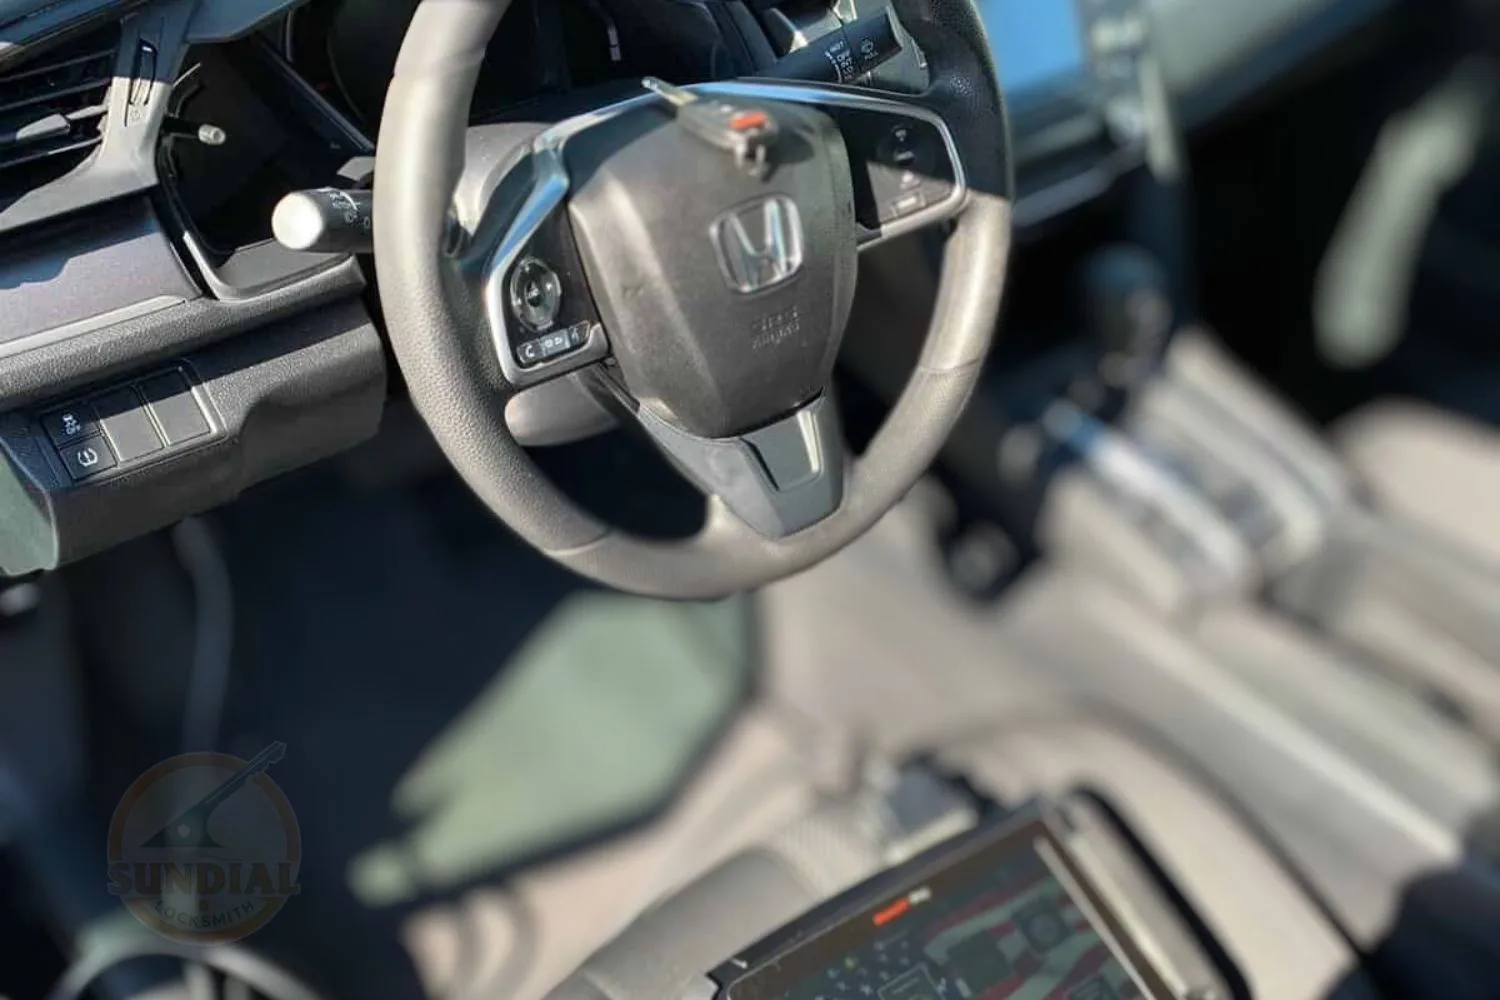 A blurred image focused on the Honda logo on a steering wheel, with the car's dashboard and center console softly out of focus in the background